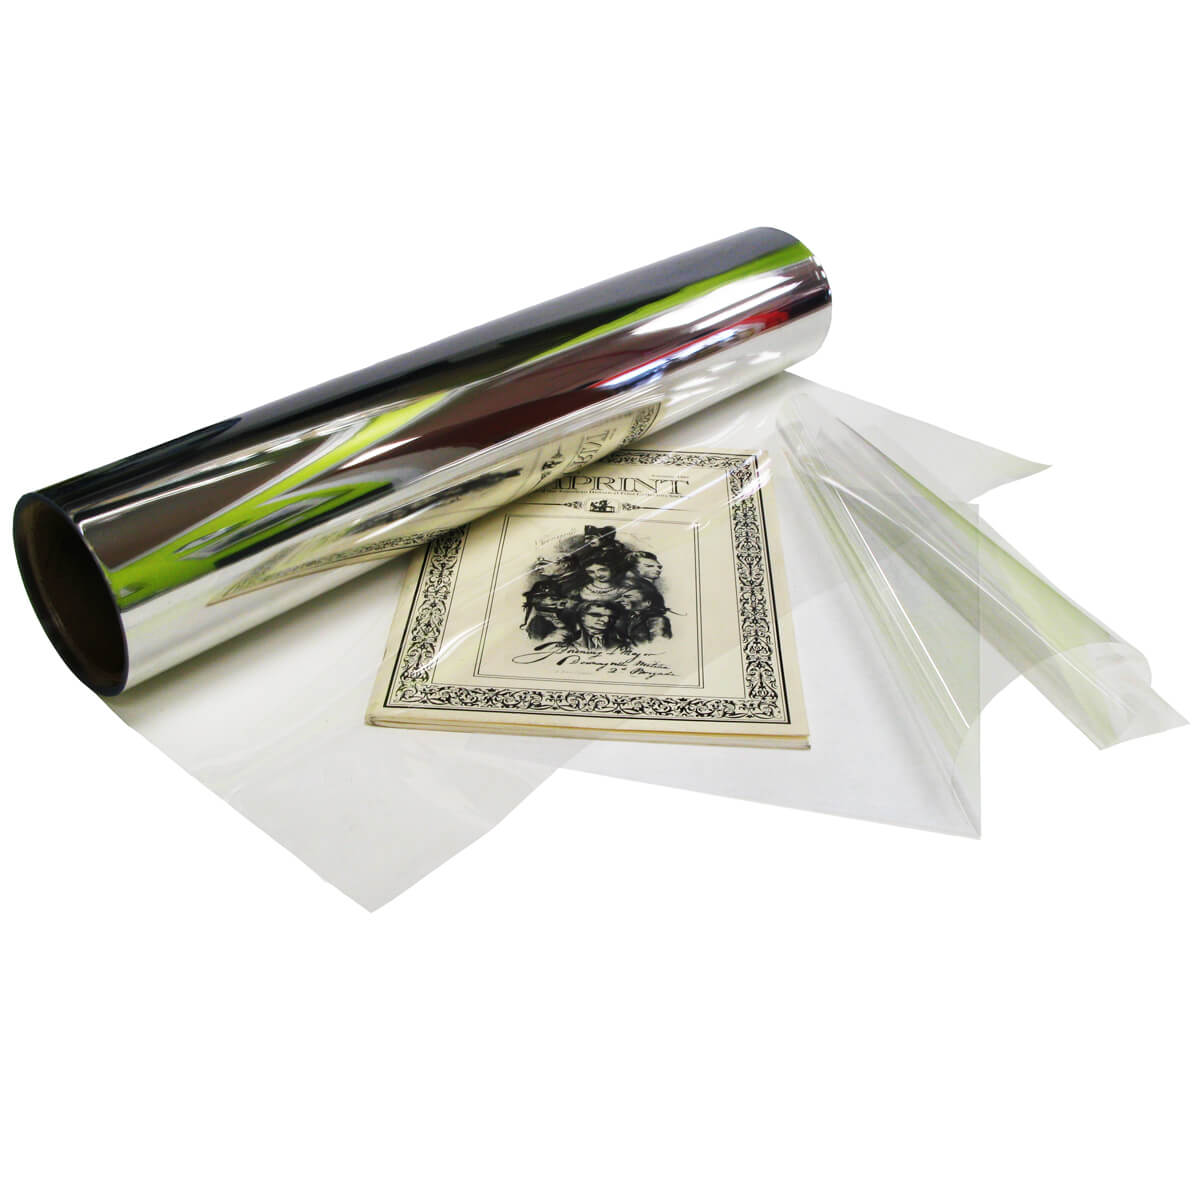 Frosted Mylar 100 Sheet Packs and Rolls 